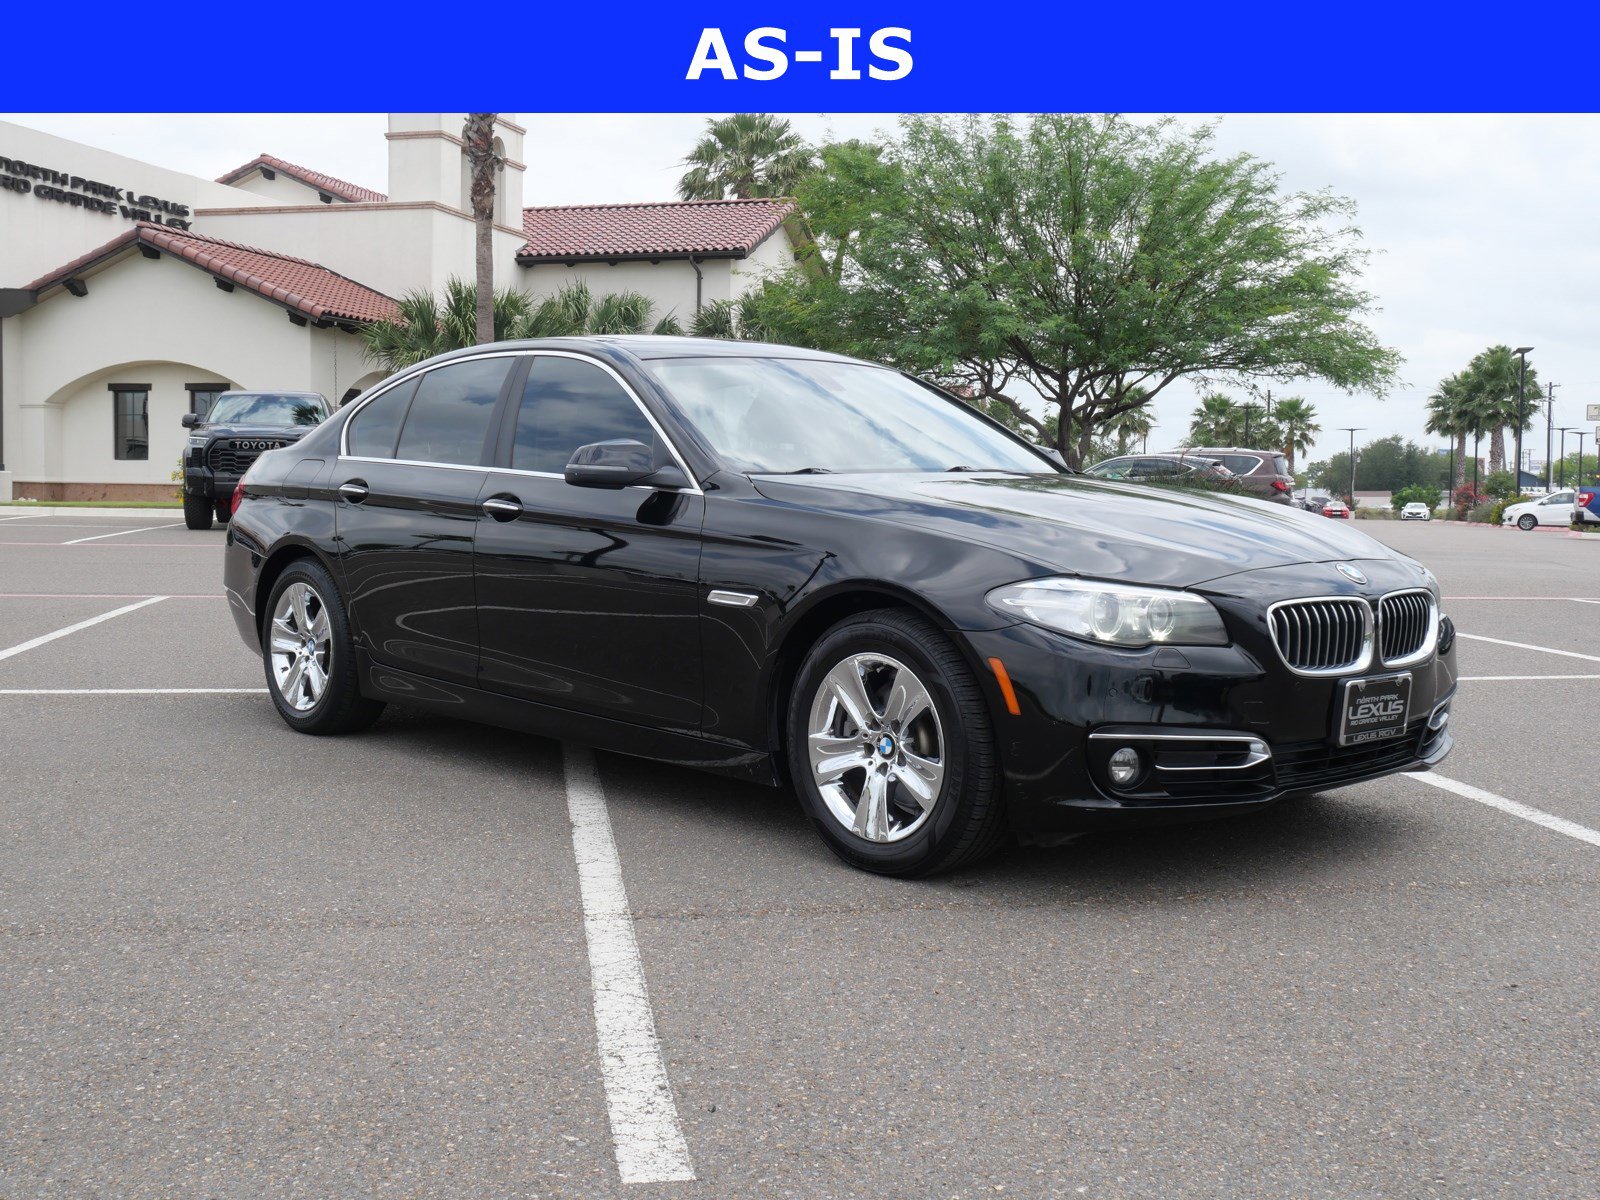 Used BMW 528i for Sale Right Now - Autotrader